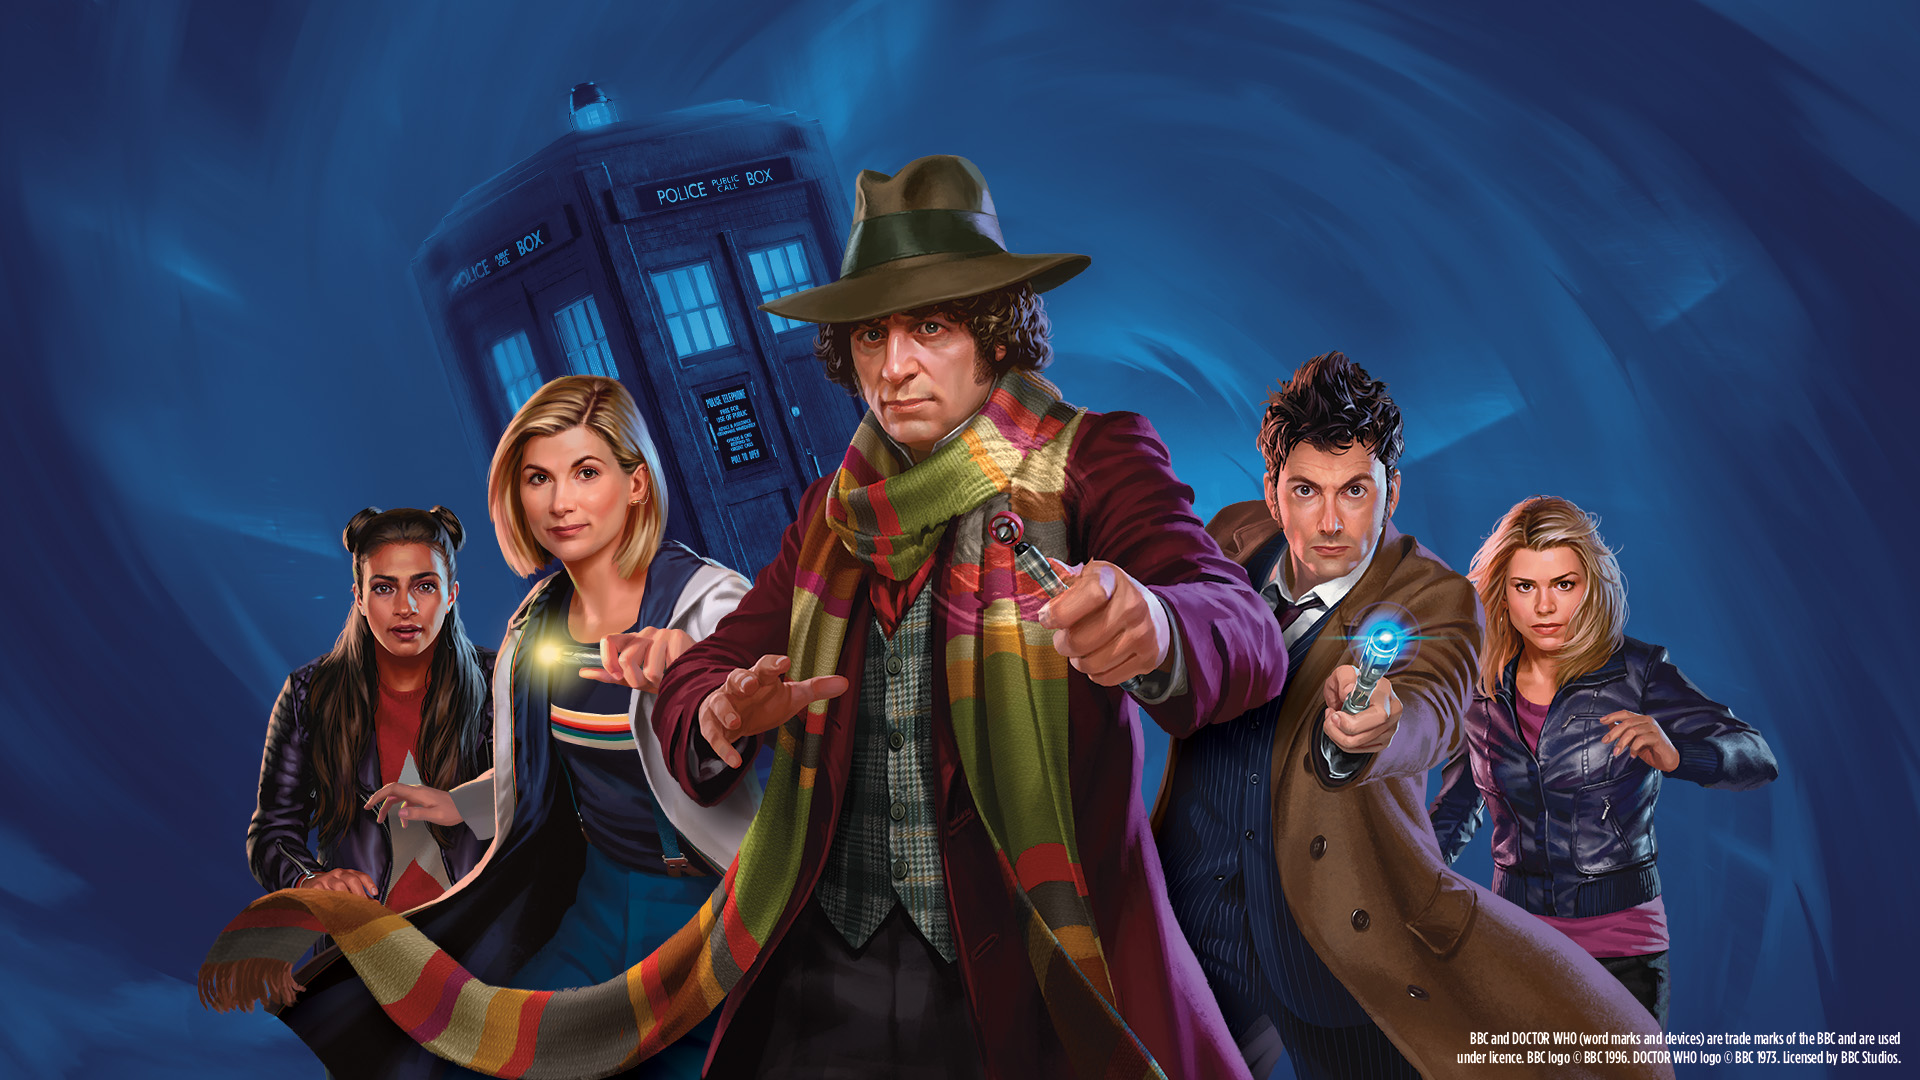 All Doctors, Their Companions, And More Revealed On First Day Of MTG Doctor Who Previews